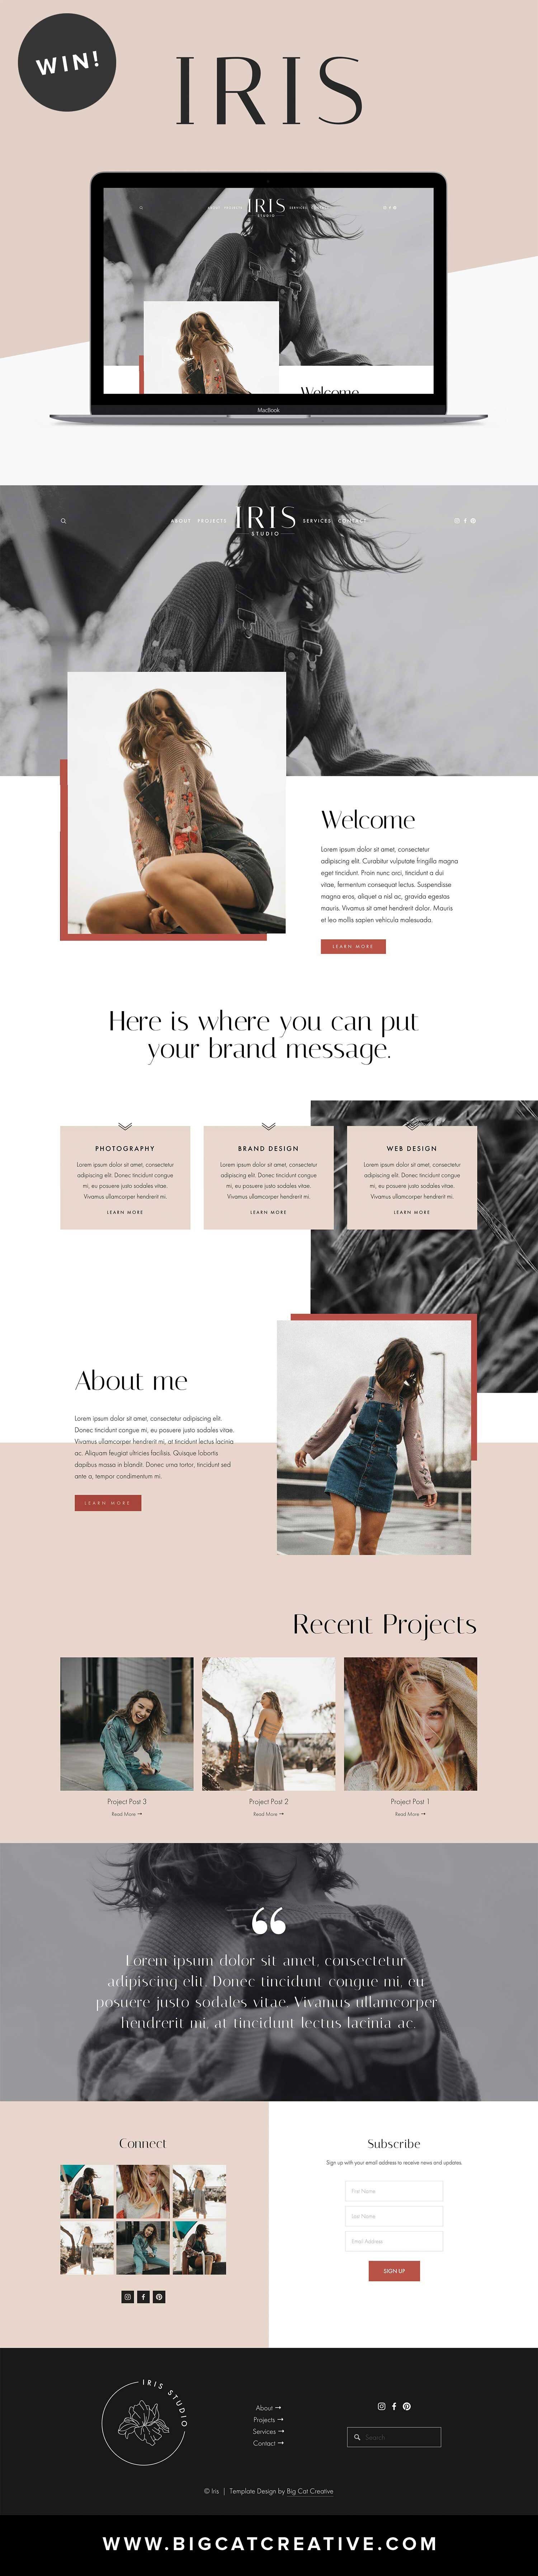 Why You Shouldn't Use Linktree & How to Create Your Own in Squarespace —  Big Cat Creative - Squarespace Templates & Resources